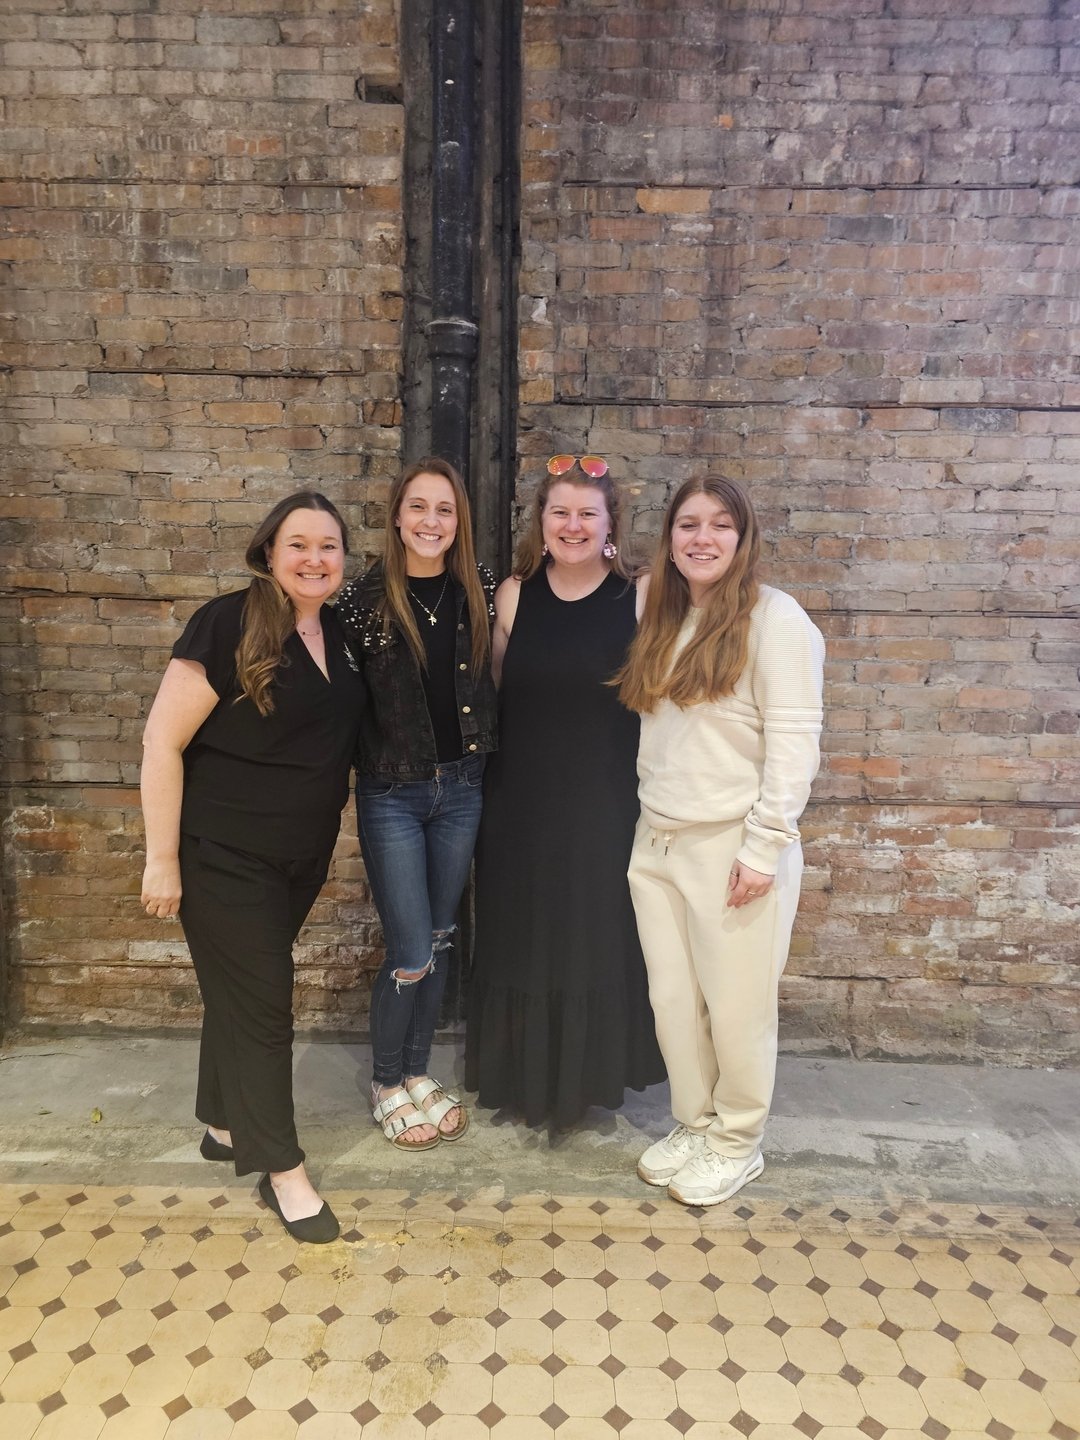 🚨🚨Wedding Season #14 Starts NOW!!🚨🚨

✨We officially kicked off our 14th wedding season with a team bonding night at the Bagley Building. ✨

Our brands @truenorthweddingsduluth, @superiorblooms, and @thevaultduluth are ready to rock an exciting se